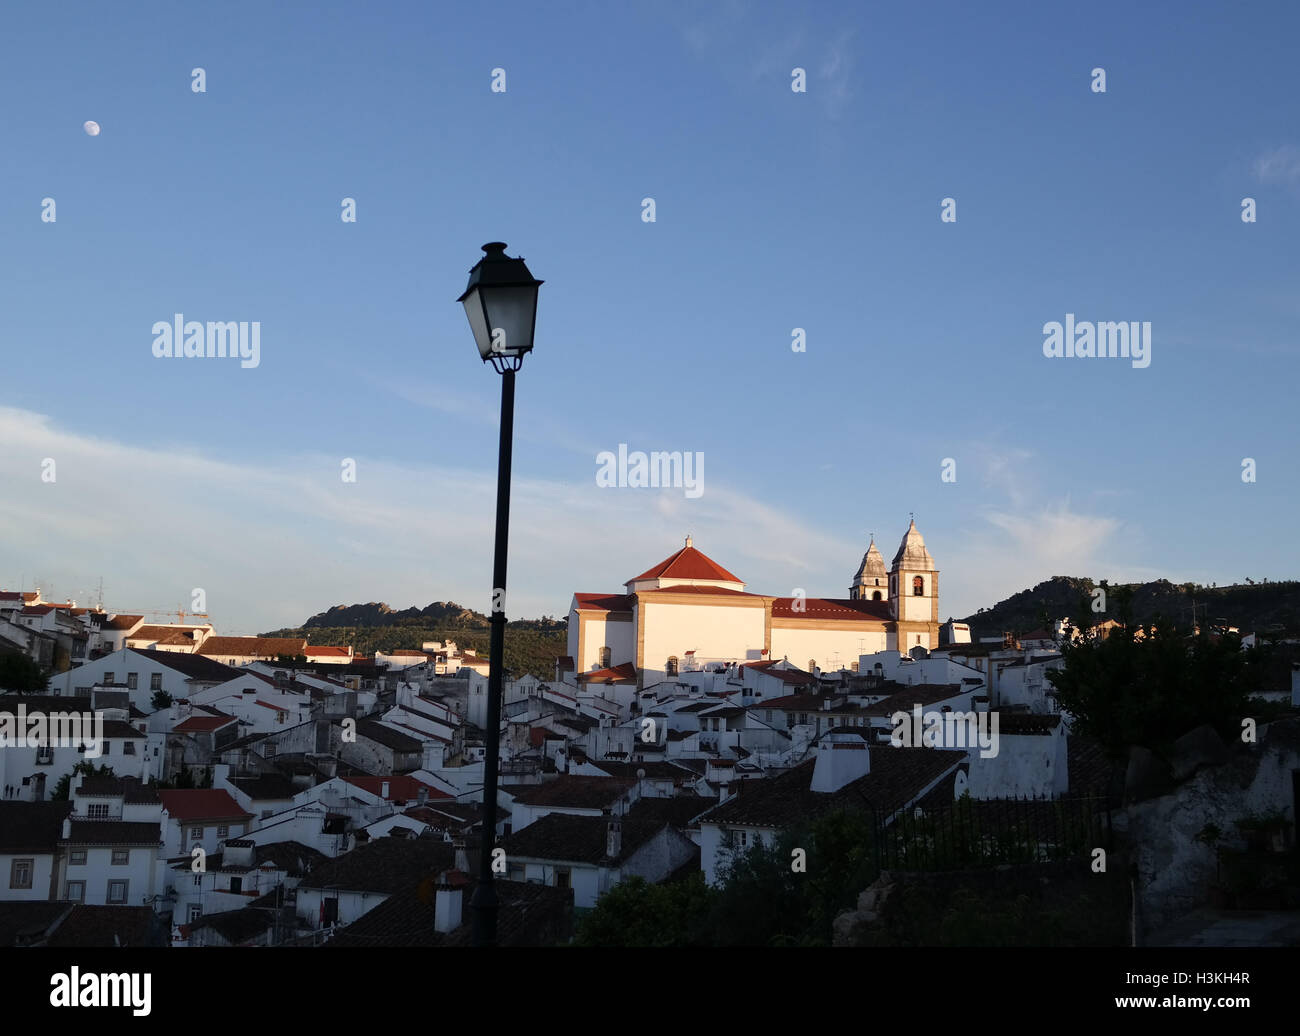 Small town in Portugal Stock Photo